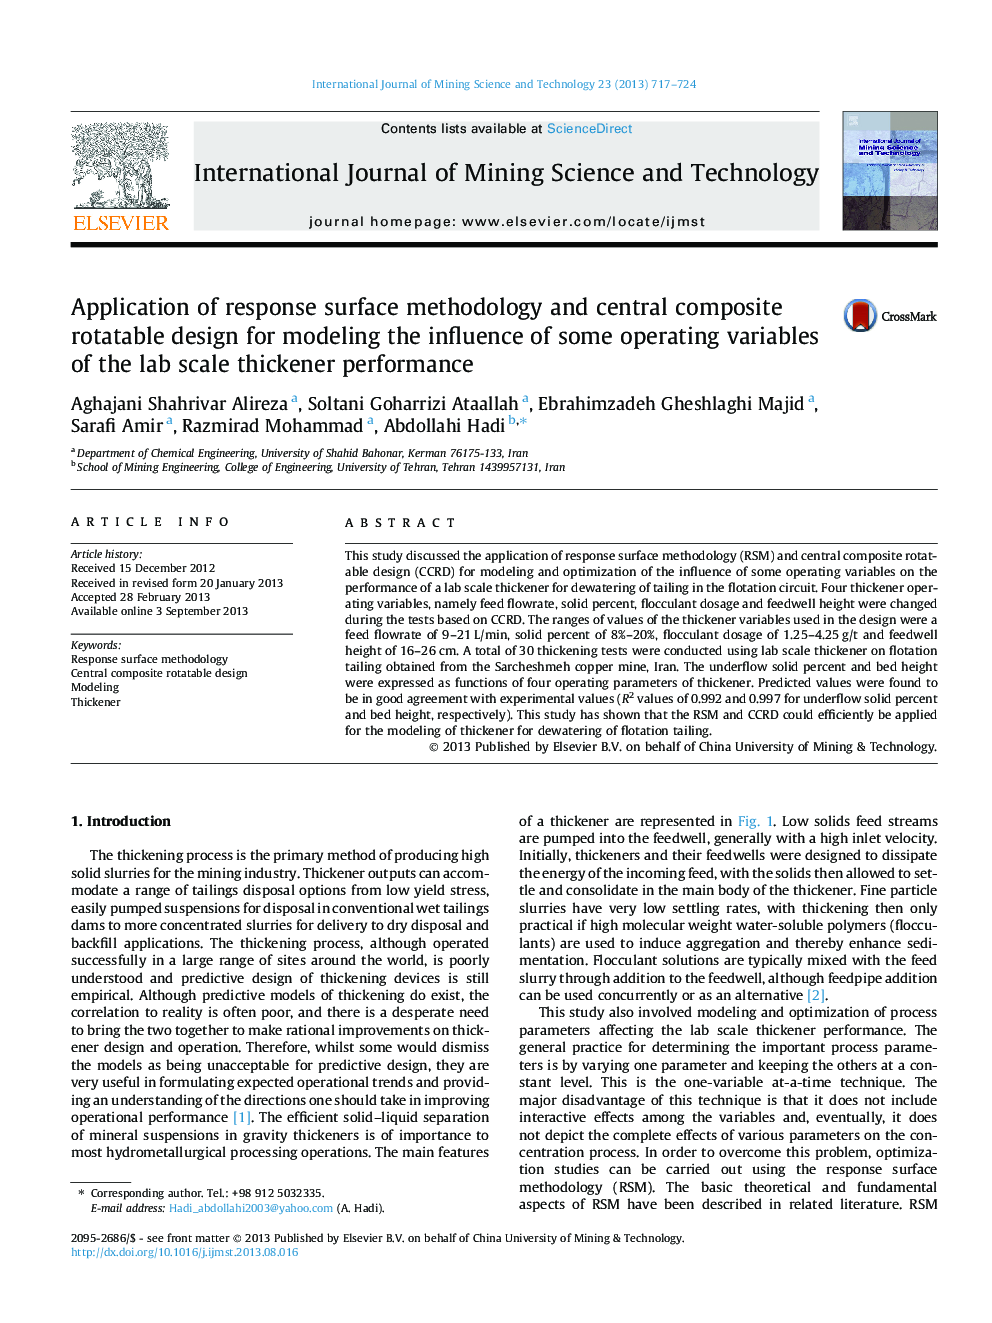 Application of response surface methodology and central composite rotatable design for modeling the influence of some operating variables of the lab scale thickener performance